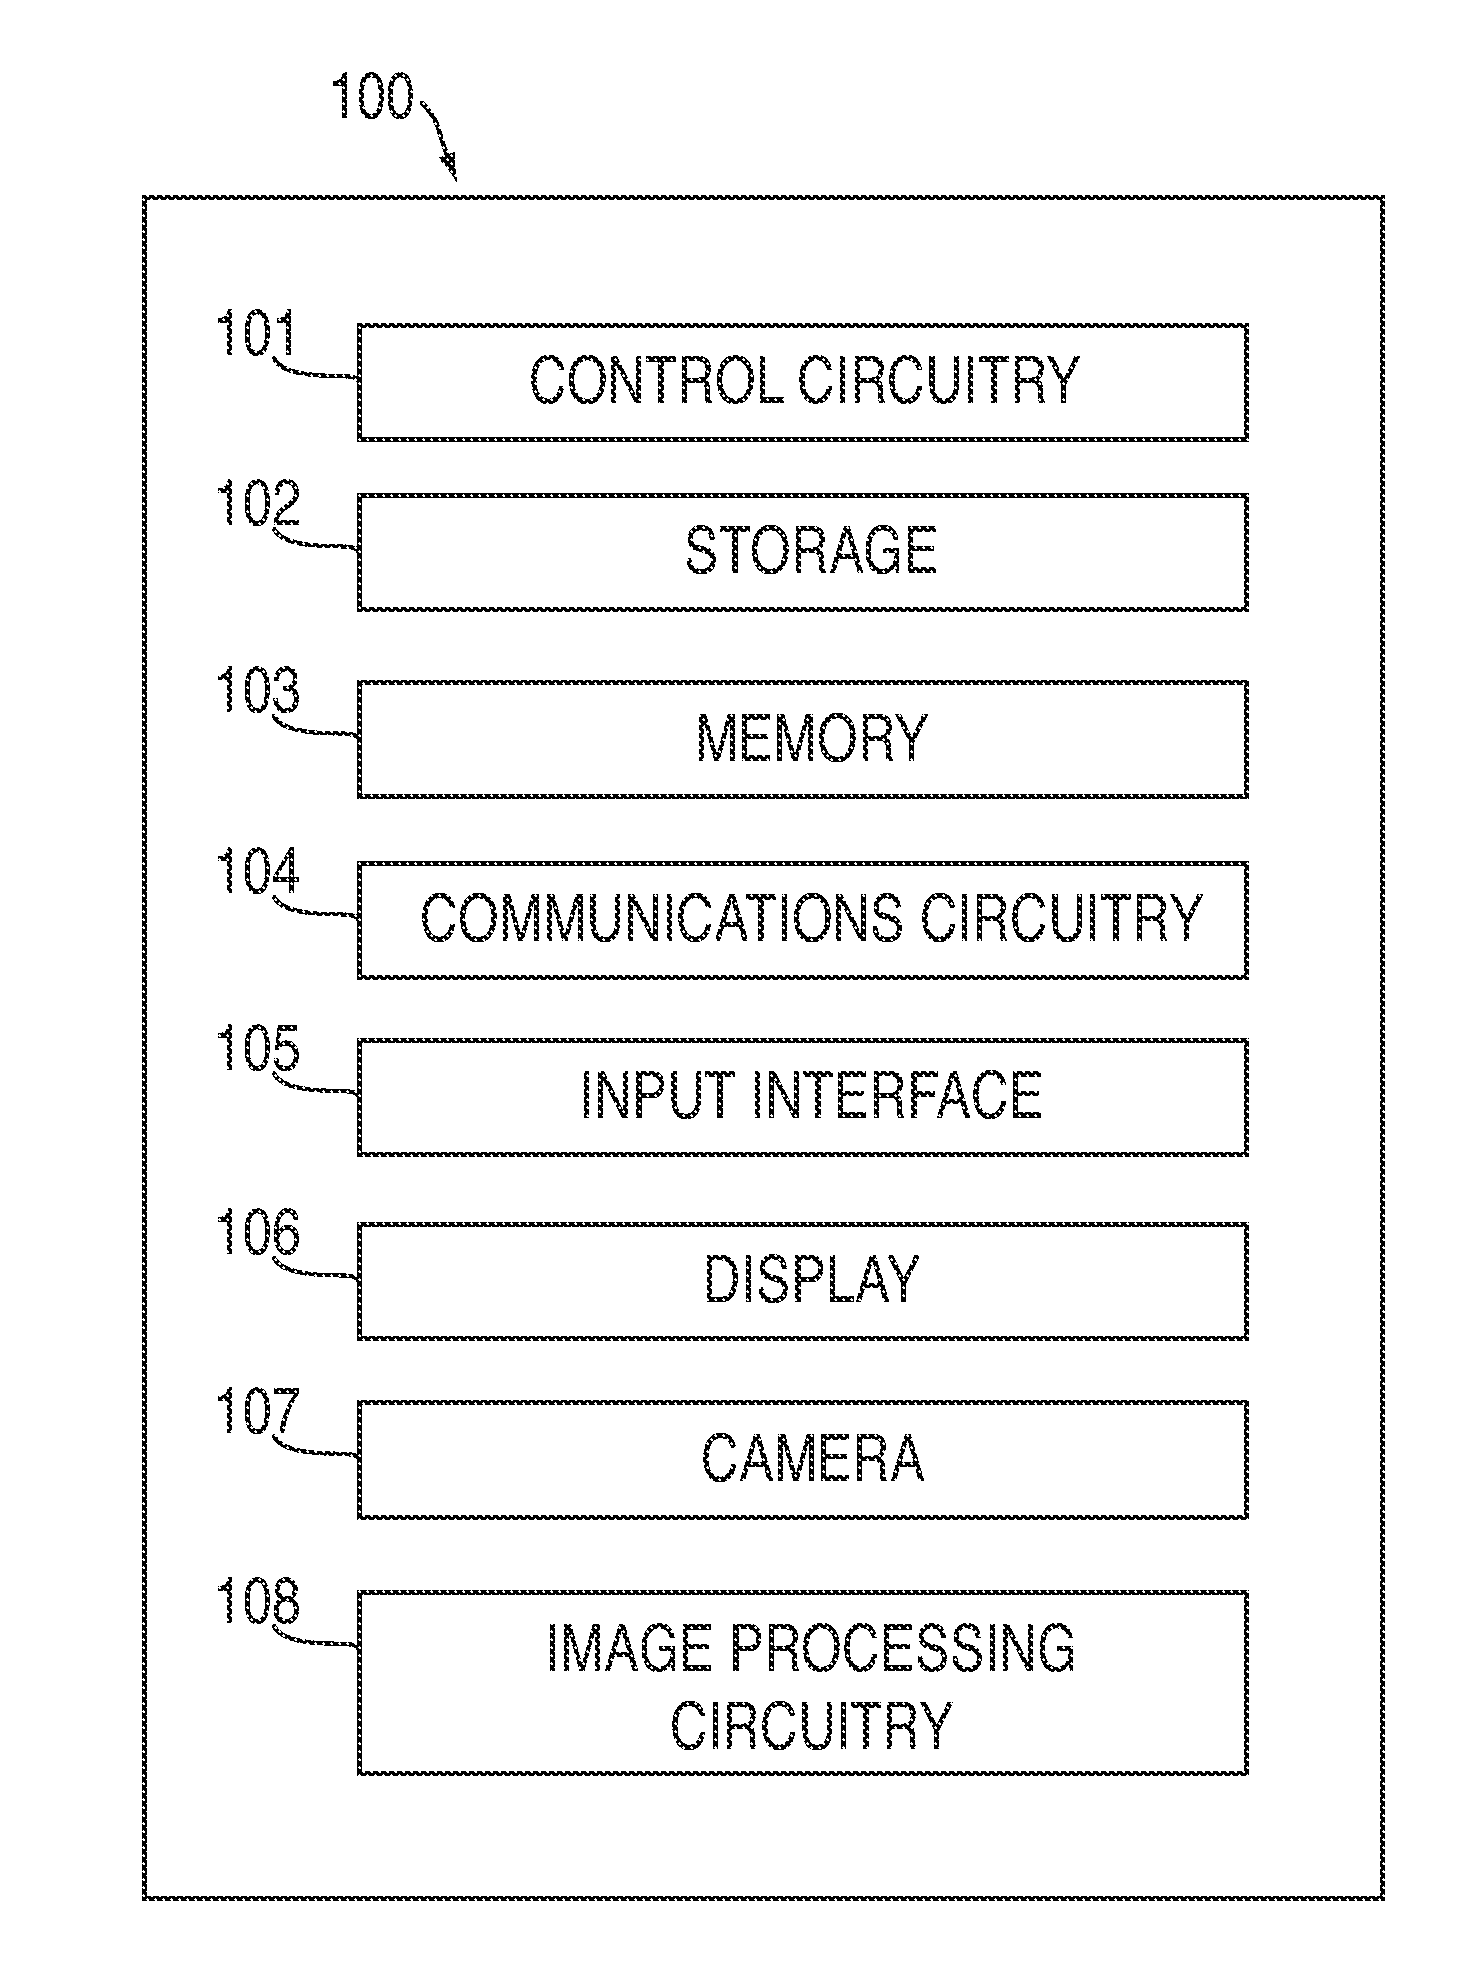 Systems and methods for receiving infrared data with a camera designed to detect images based on visible light